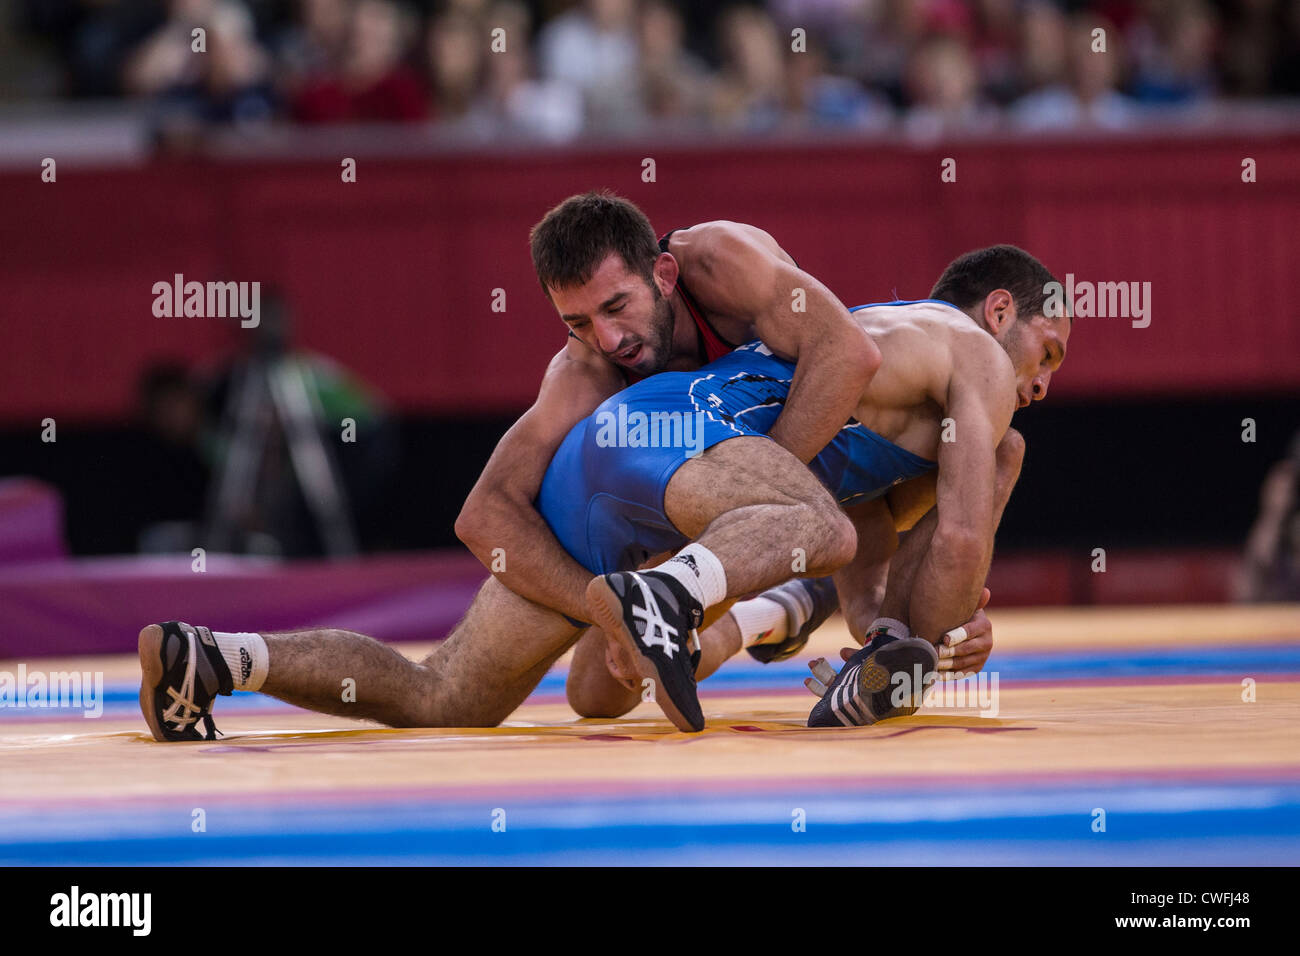 Men's 55kg Freestyle Wrestling at t he Olympic Summer Games, London 2012 Stock Photo